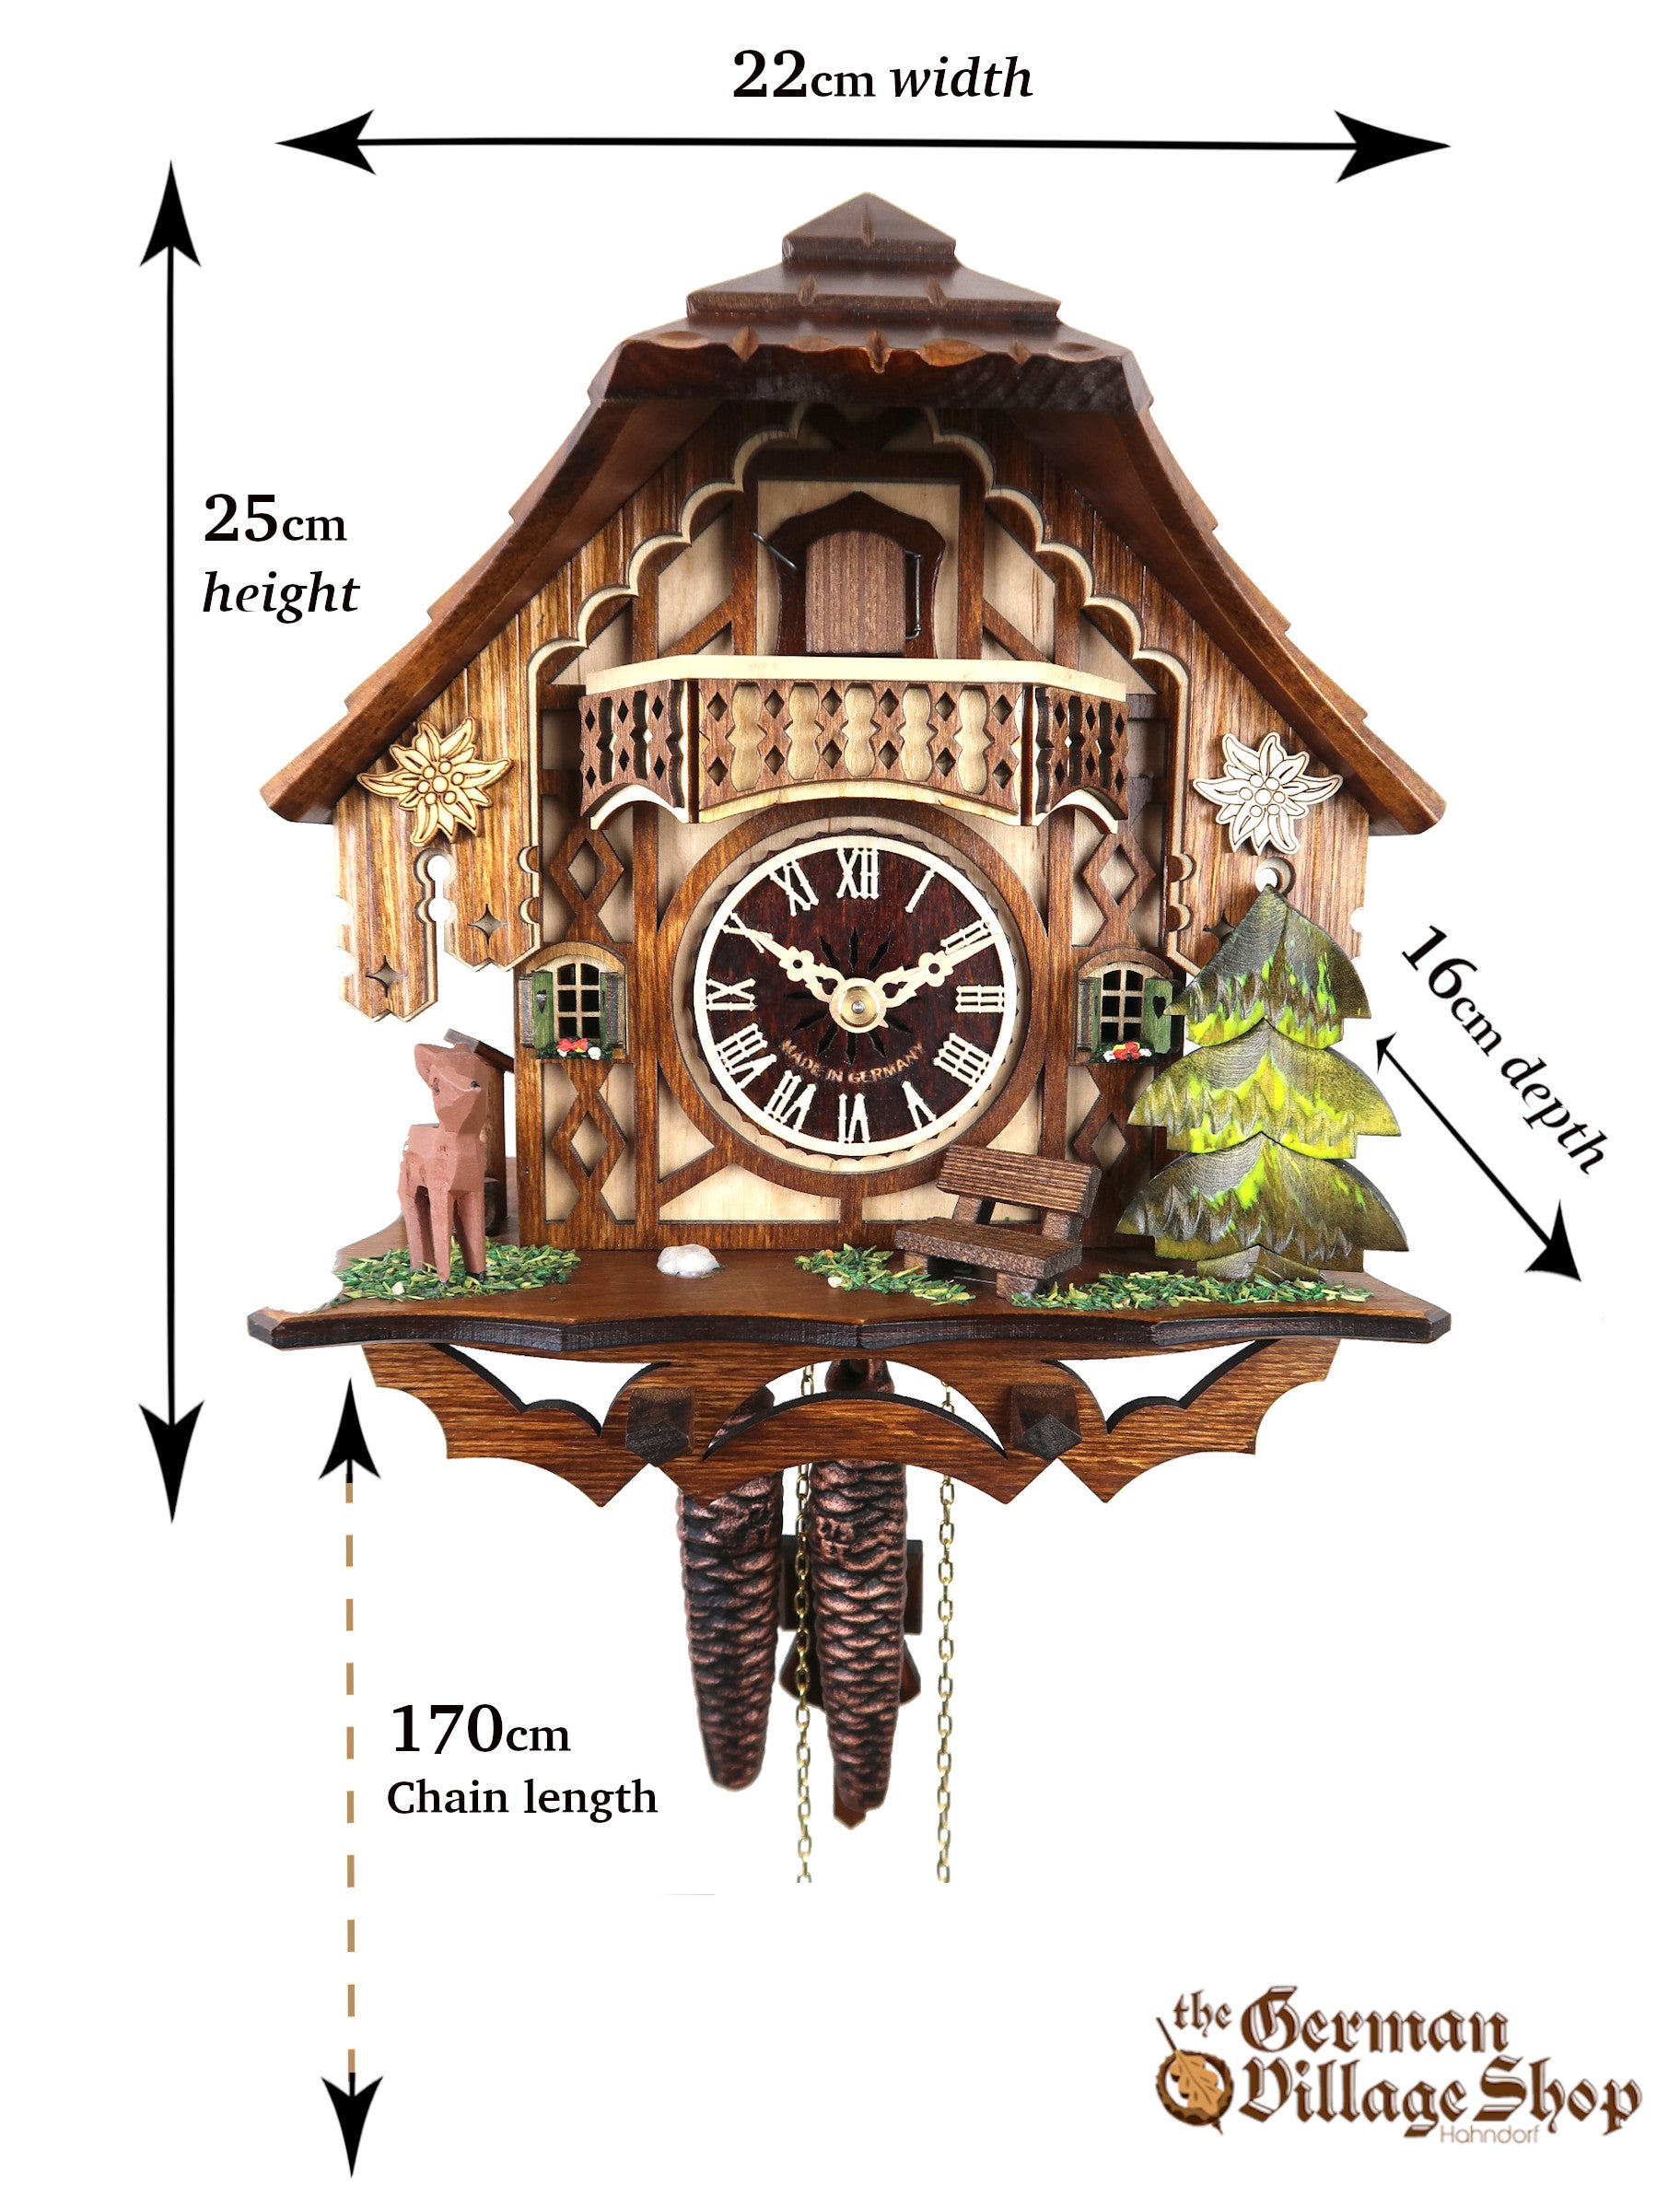 Size of German Cuckoo clock imported and sold in Australia